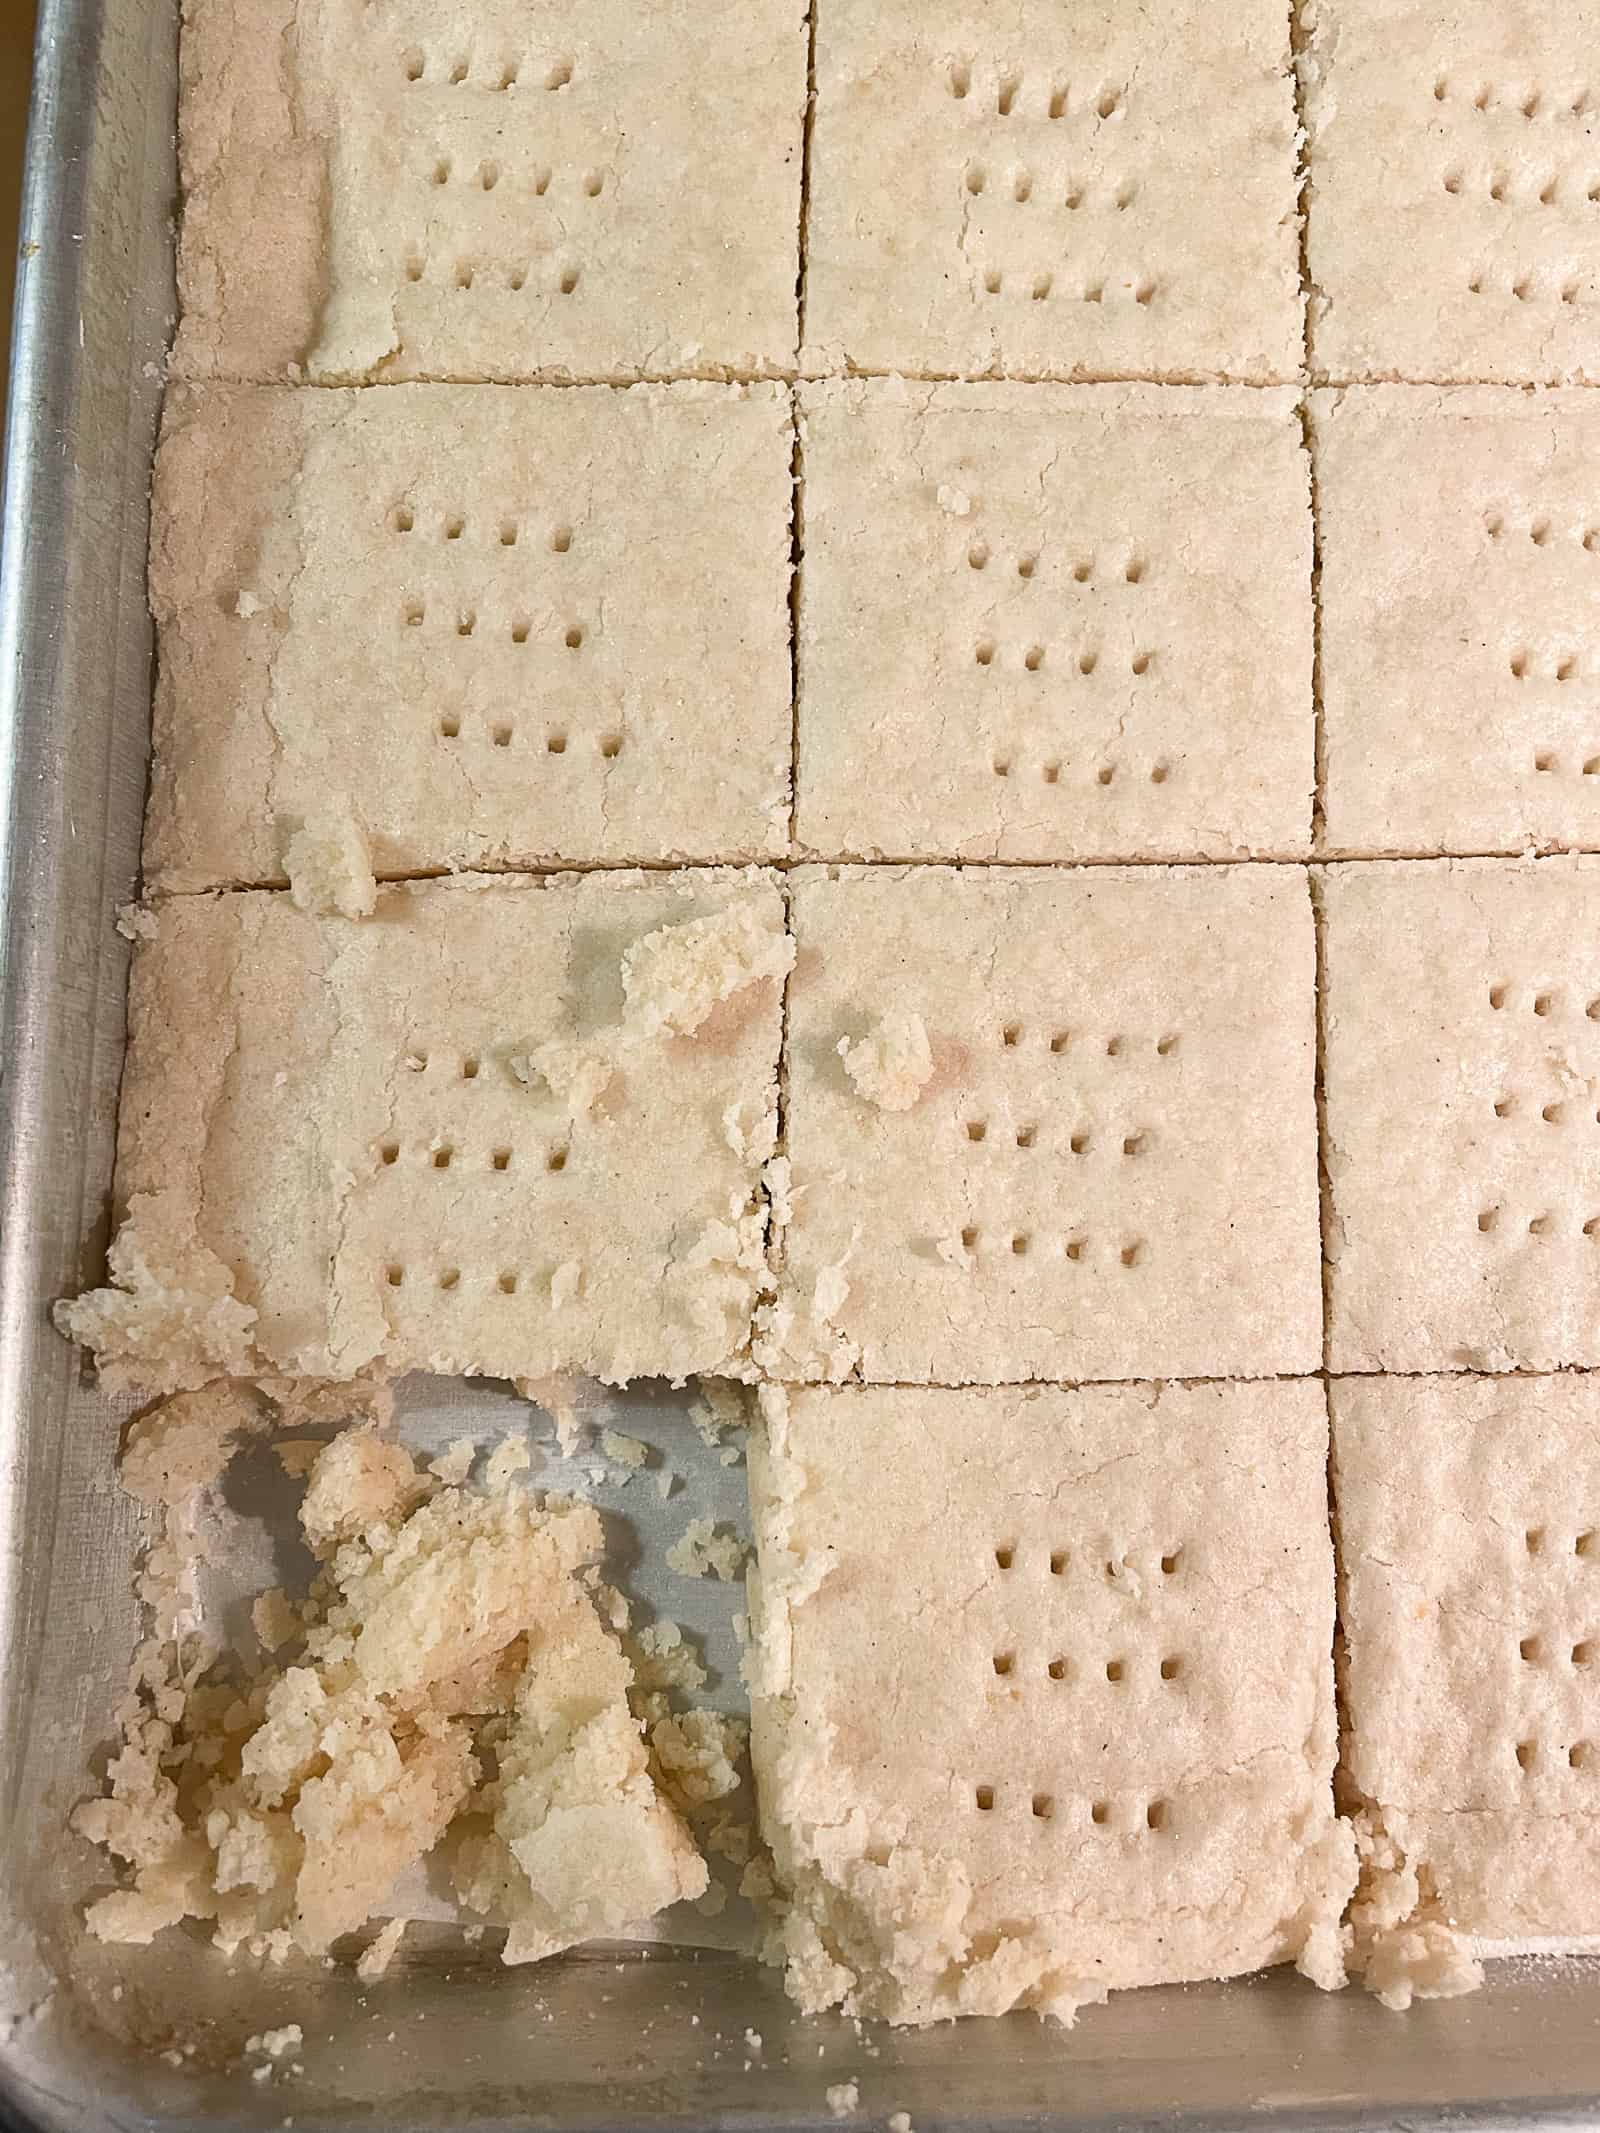 Gluten-free shortbread cookie in a pan. Lower left cookie crumbled because it was cut when hot.